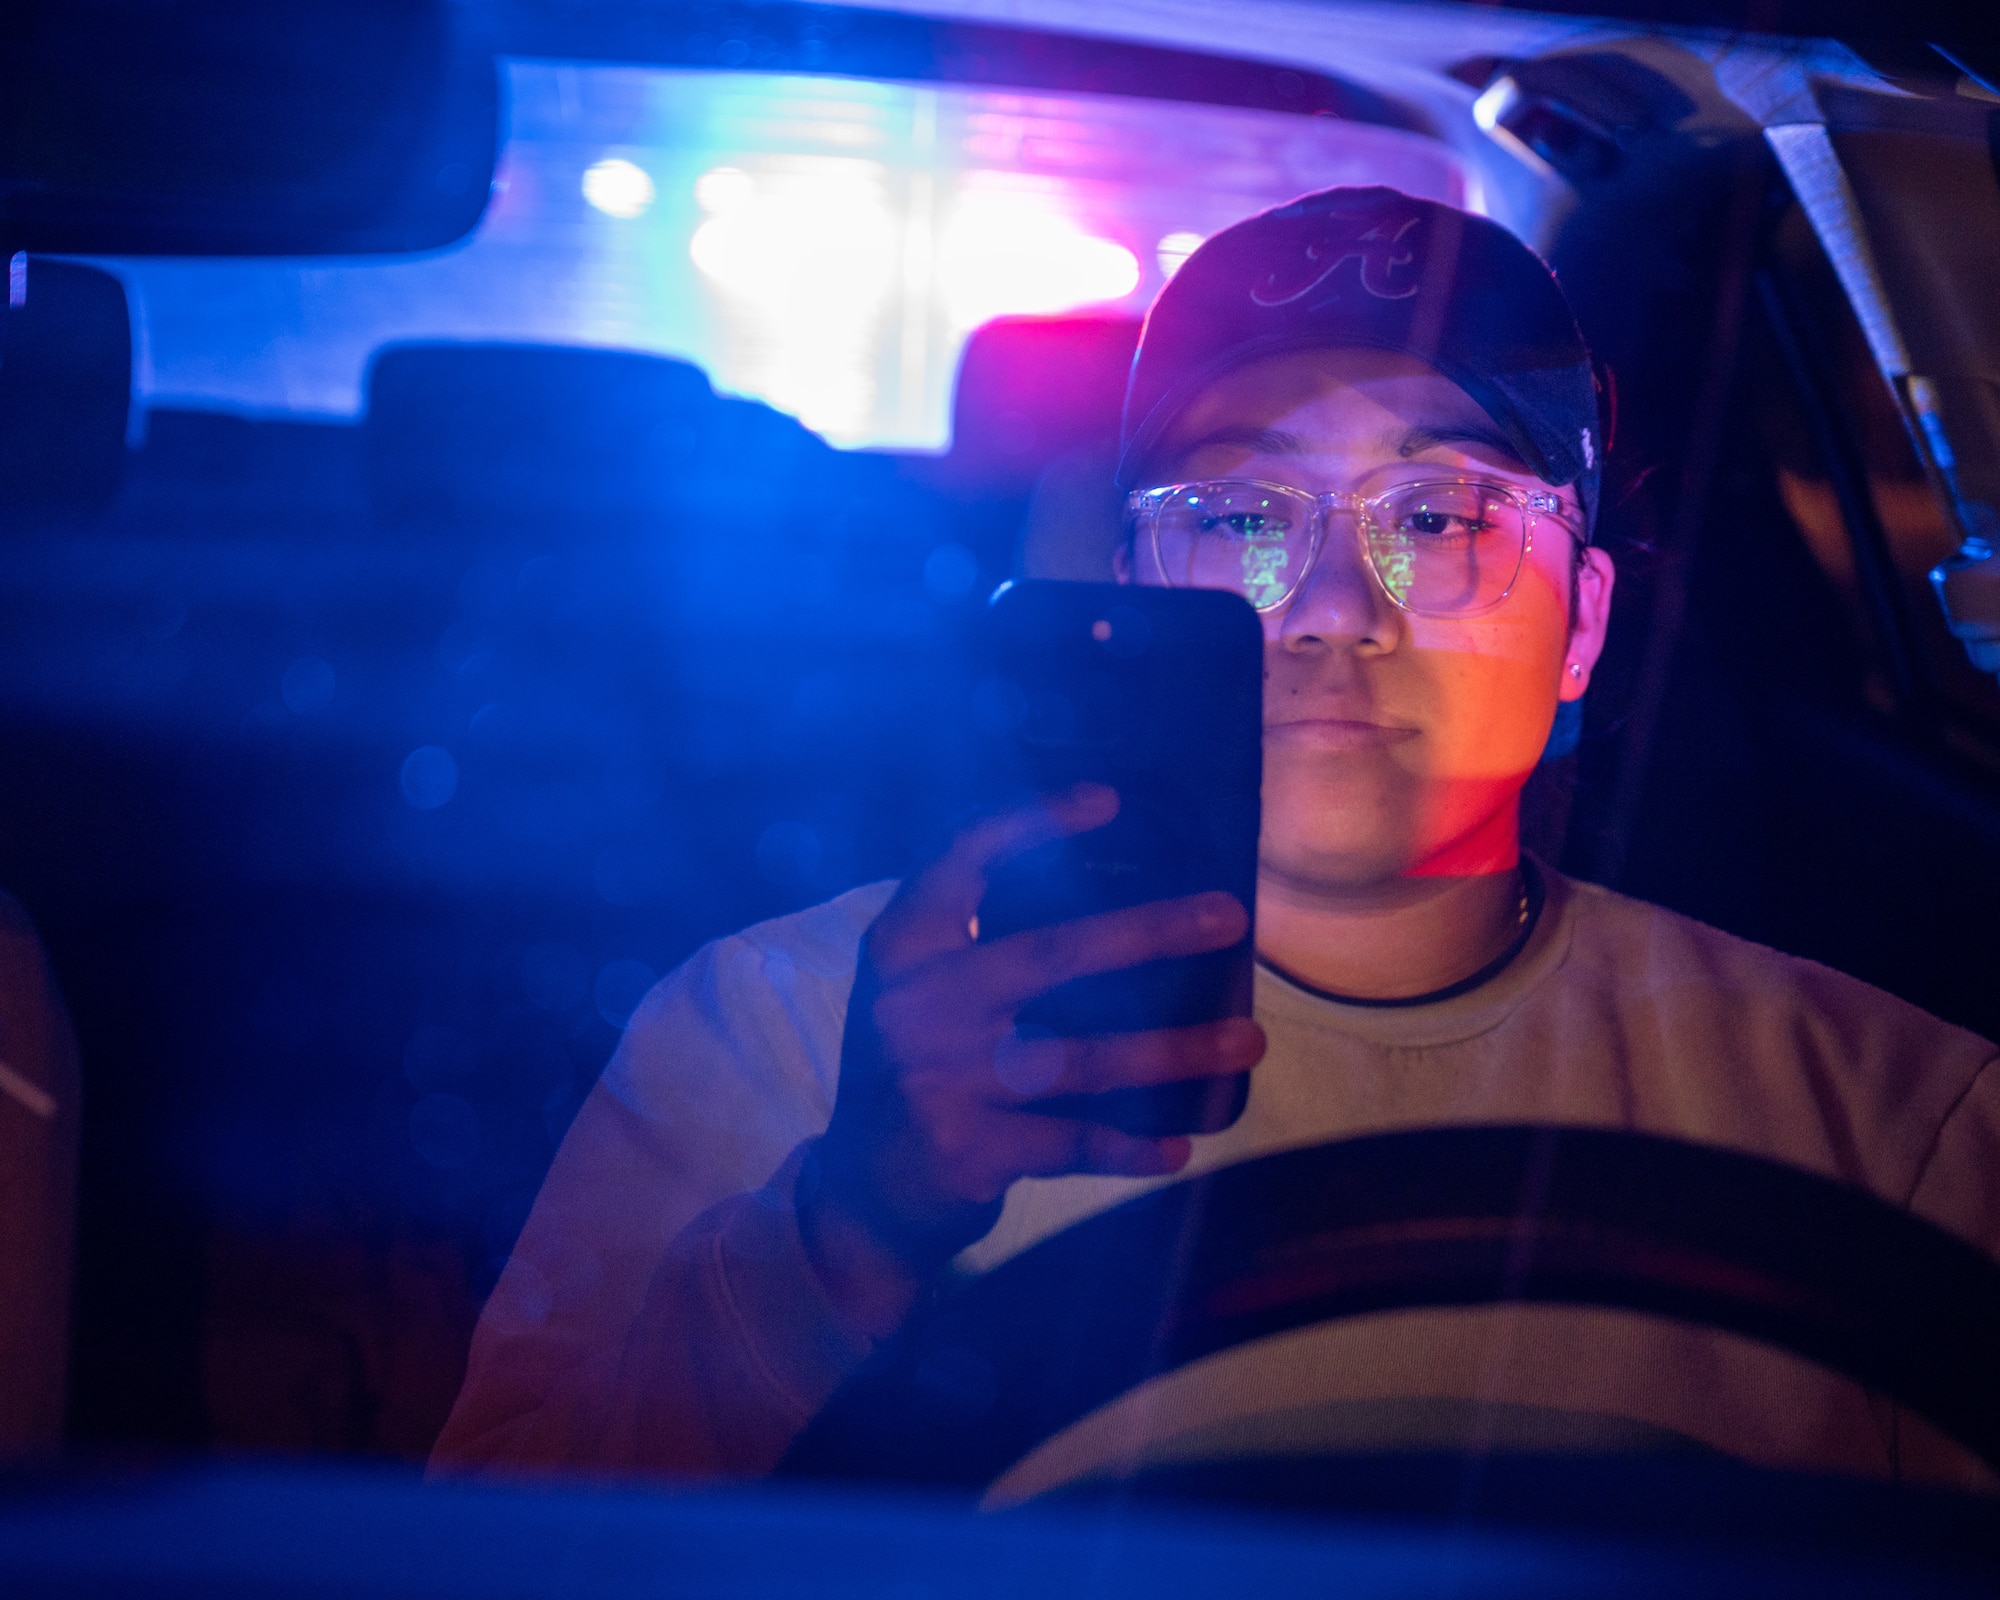 U.S. Air Force Staff Sgt. Siree Contreras, 47th Security Forces Squadron (SFS) noncommissioned officer in charge of police services, holds a phone while in her vehicle with flashing police car lights in the rear window at Laughlin Air Force Base, Texas, April 4, 2024. Distracted Driving is one of the major causes of accidents in the U.S. with 487 fatalities and 2624 serious injuries in Texas during 2022. (U.S. Air Force photo by Staff Sgt. Nicholas Larsen)